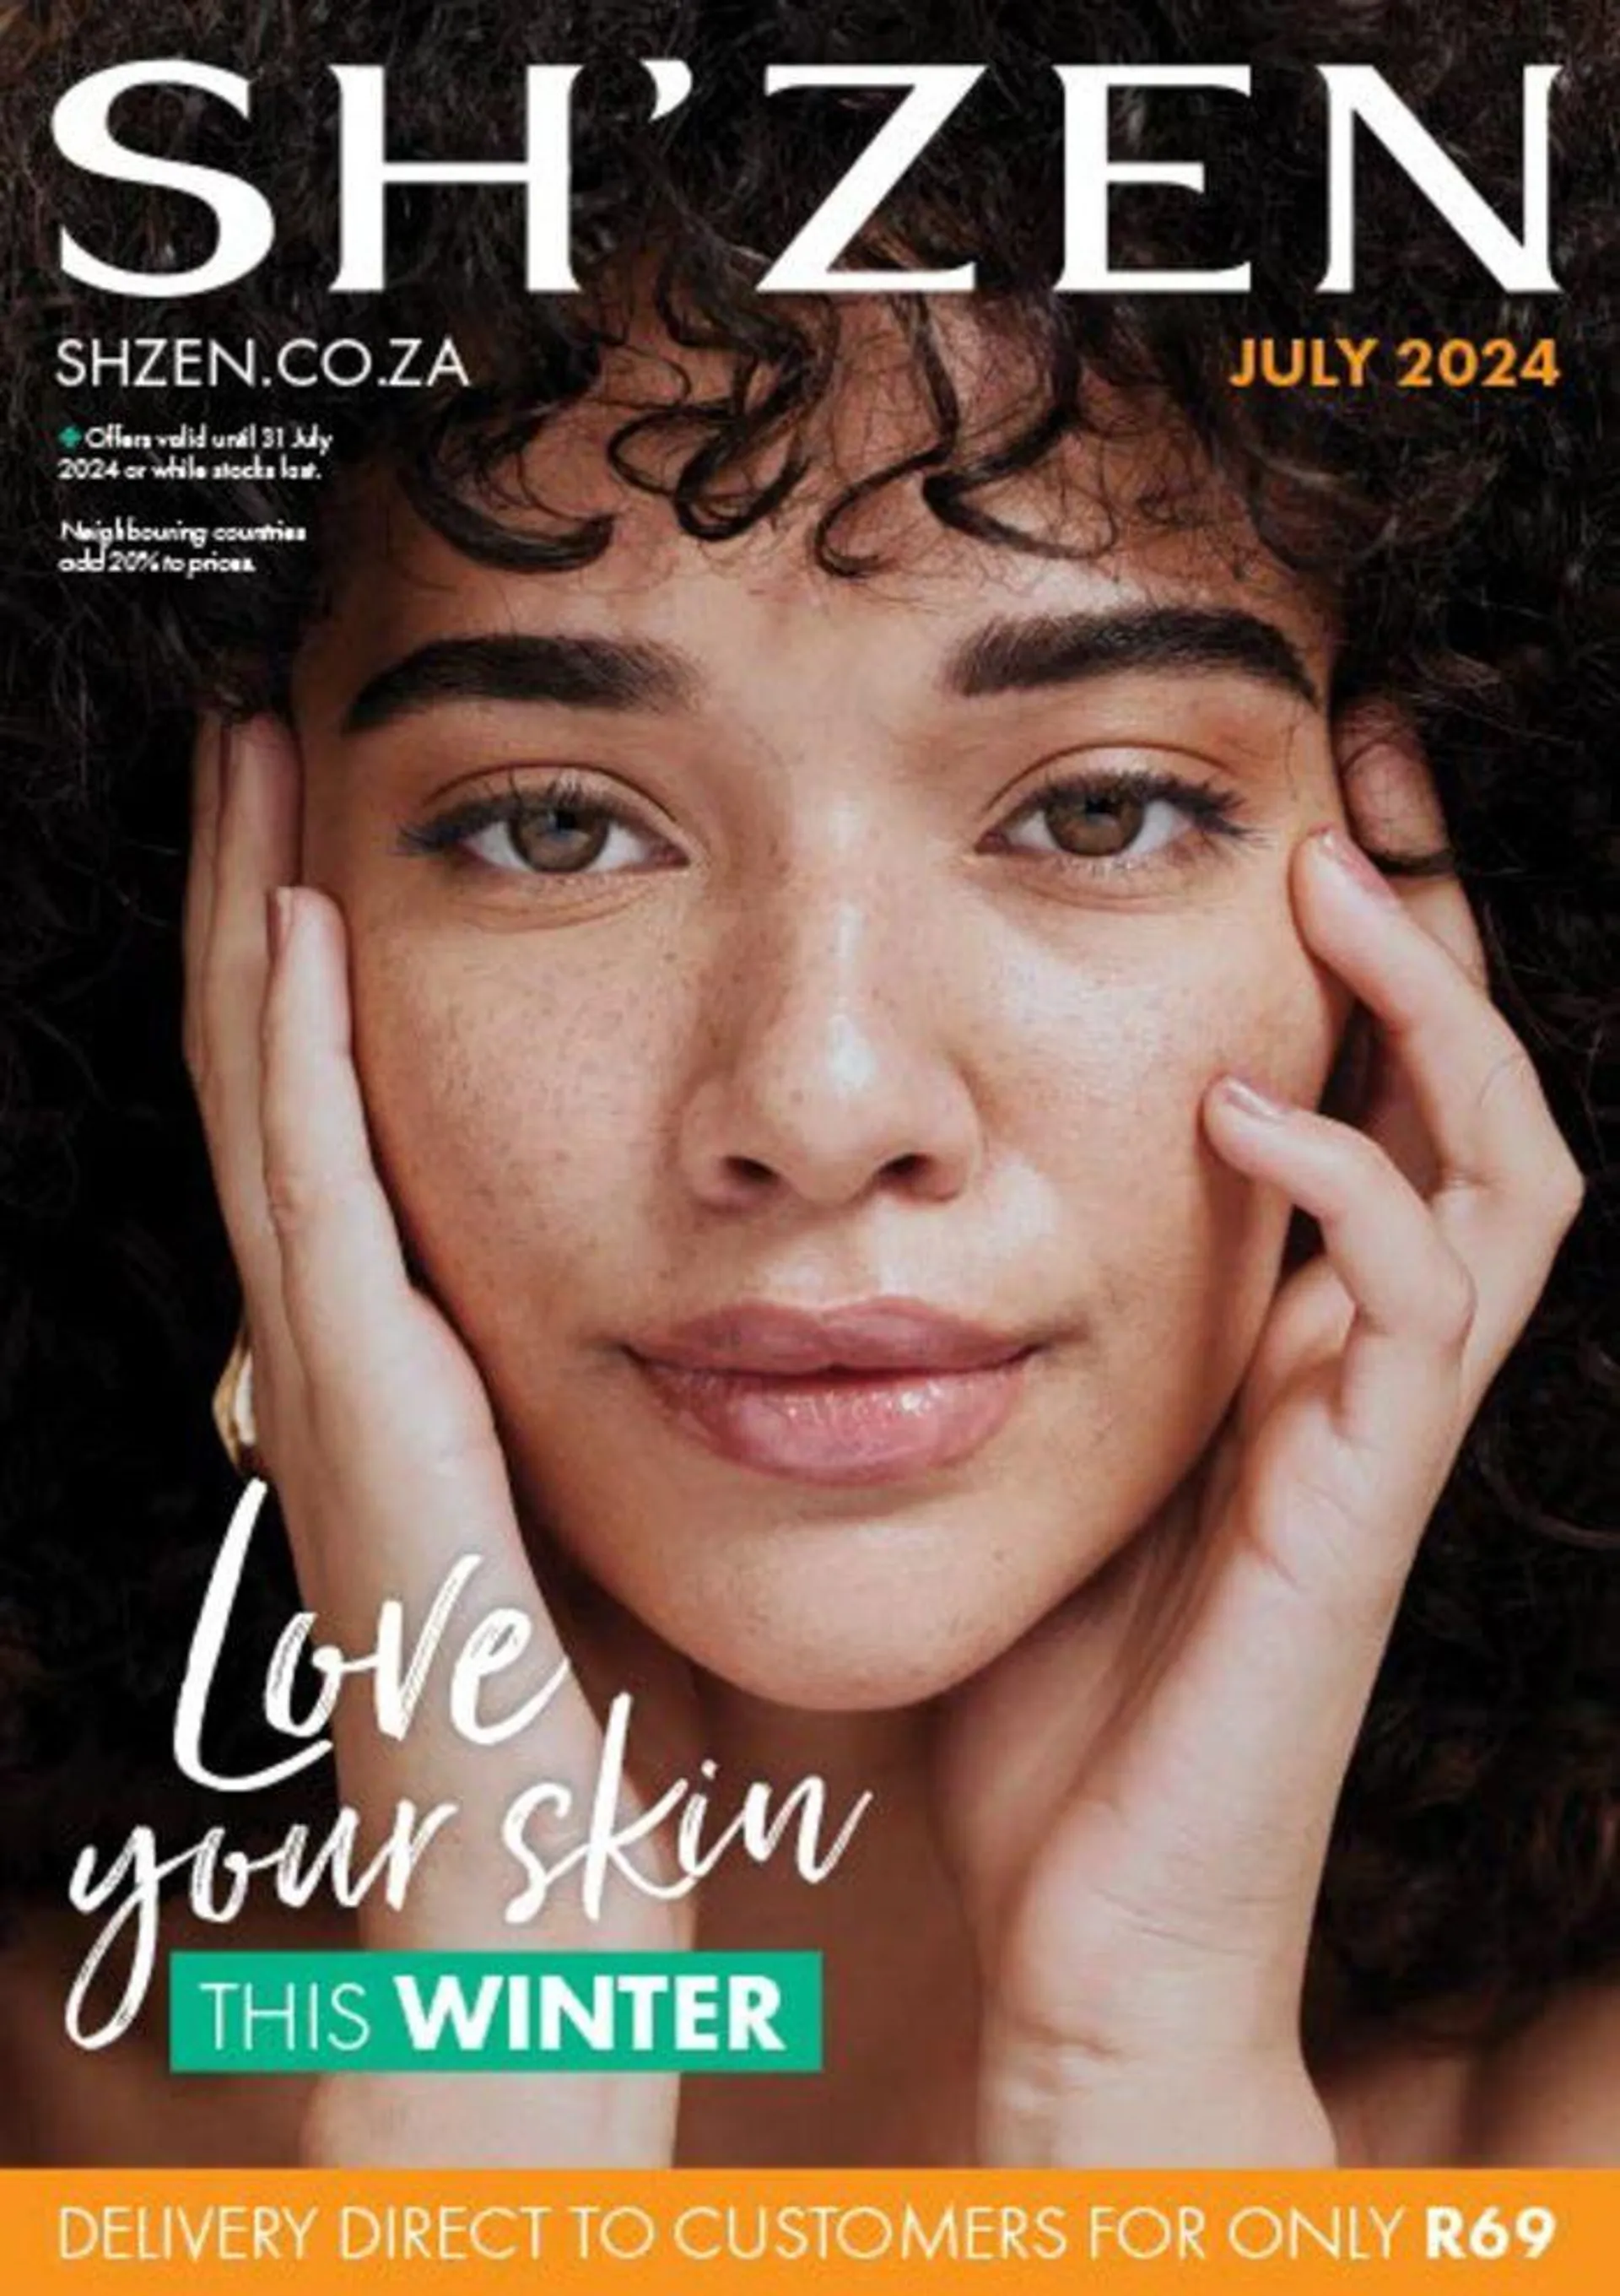 ShZen July 2024 Offers - 1